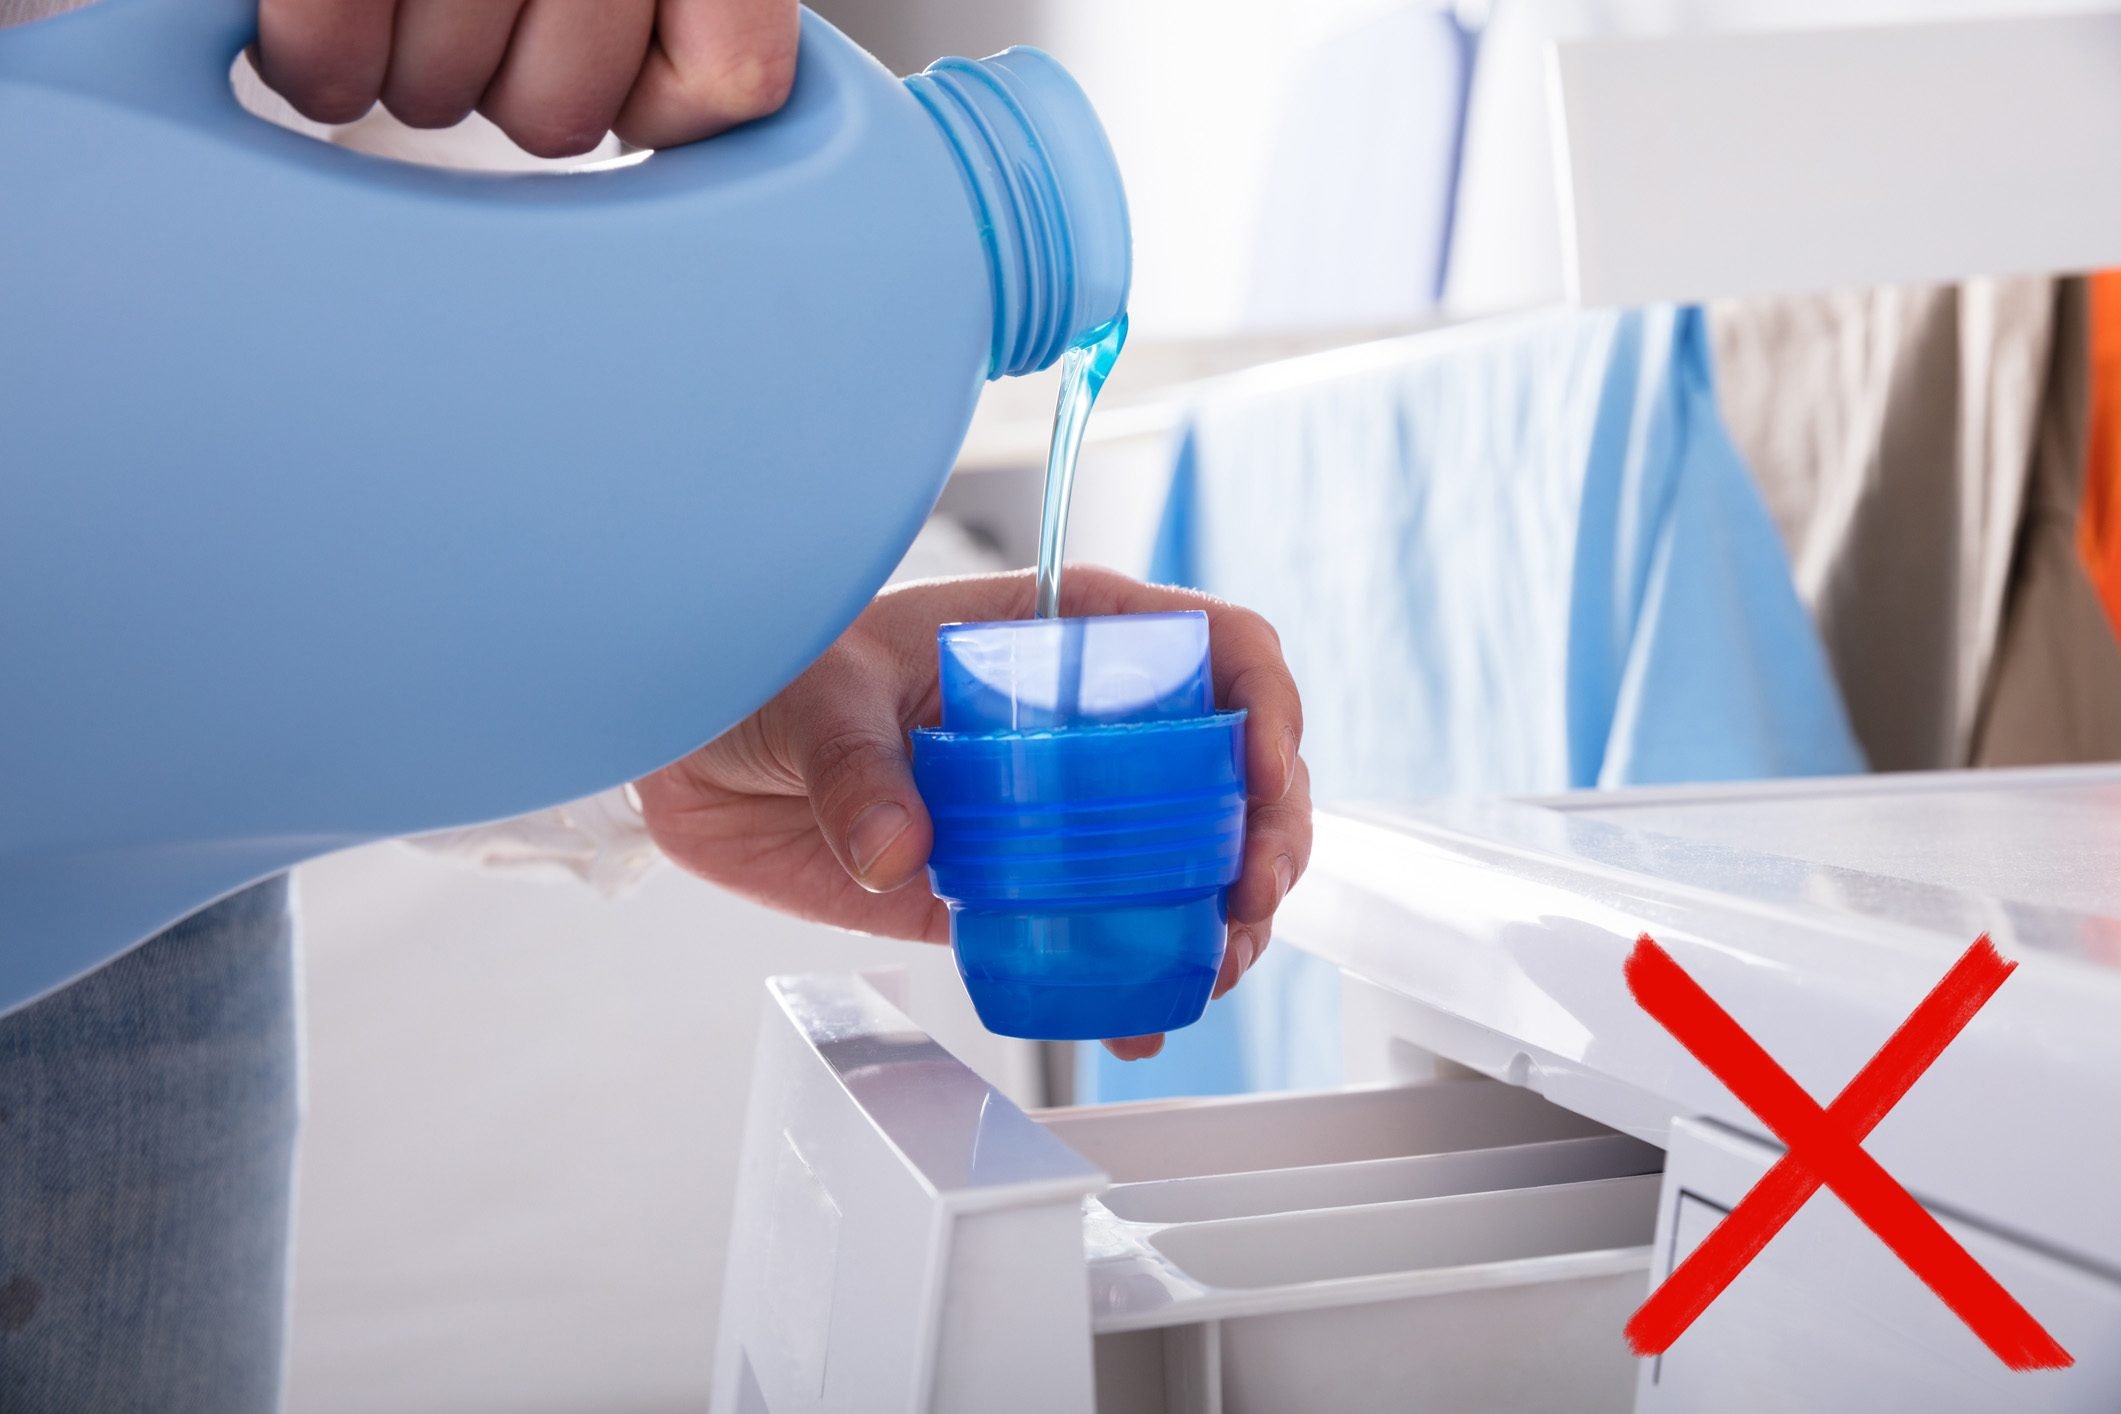 Pouring detergent into laundry